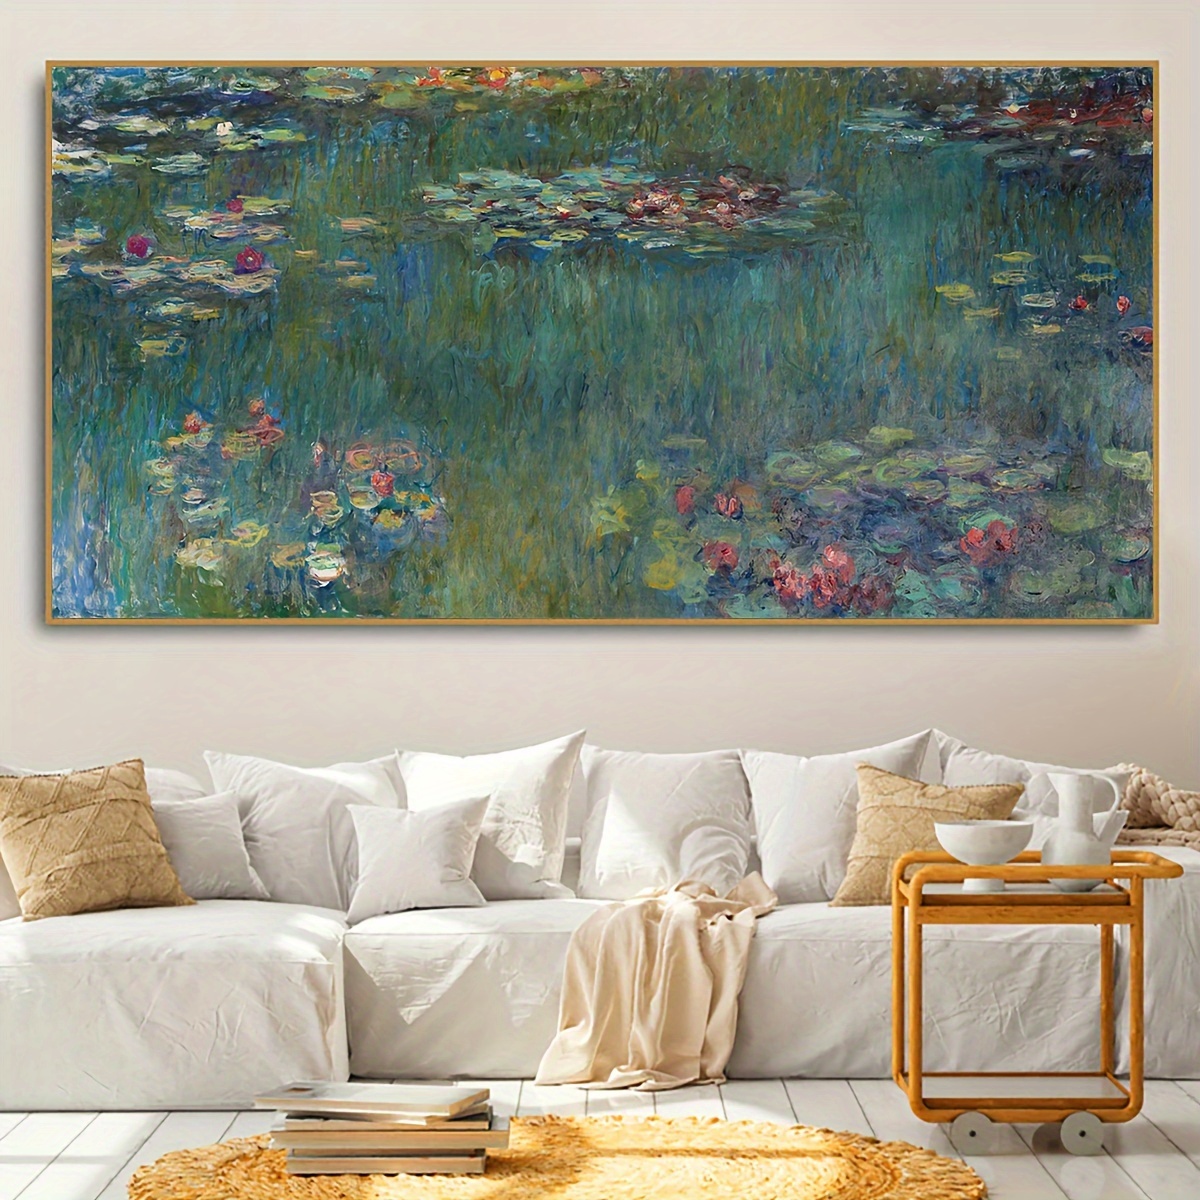 

1pc Unframed Canvas Poster, Retro Art, Flowers And Grass, Ideal Gift For Bedroom Living Room Corridor, Wall Art, Wall Decor, Winter Decor, Room Decoration